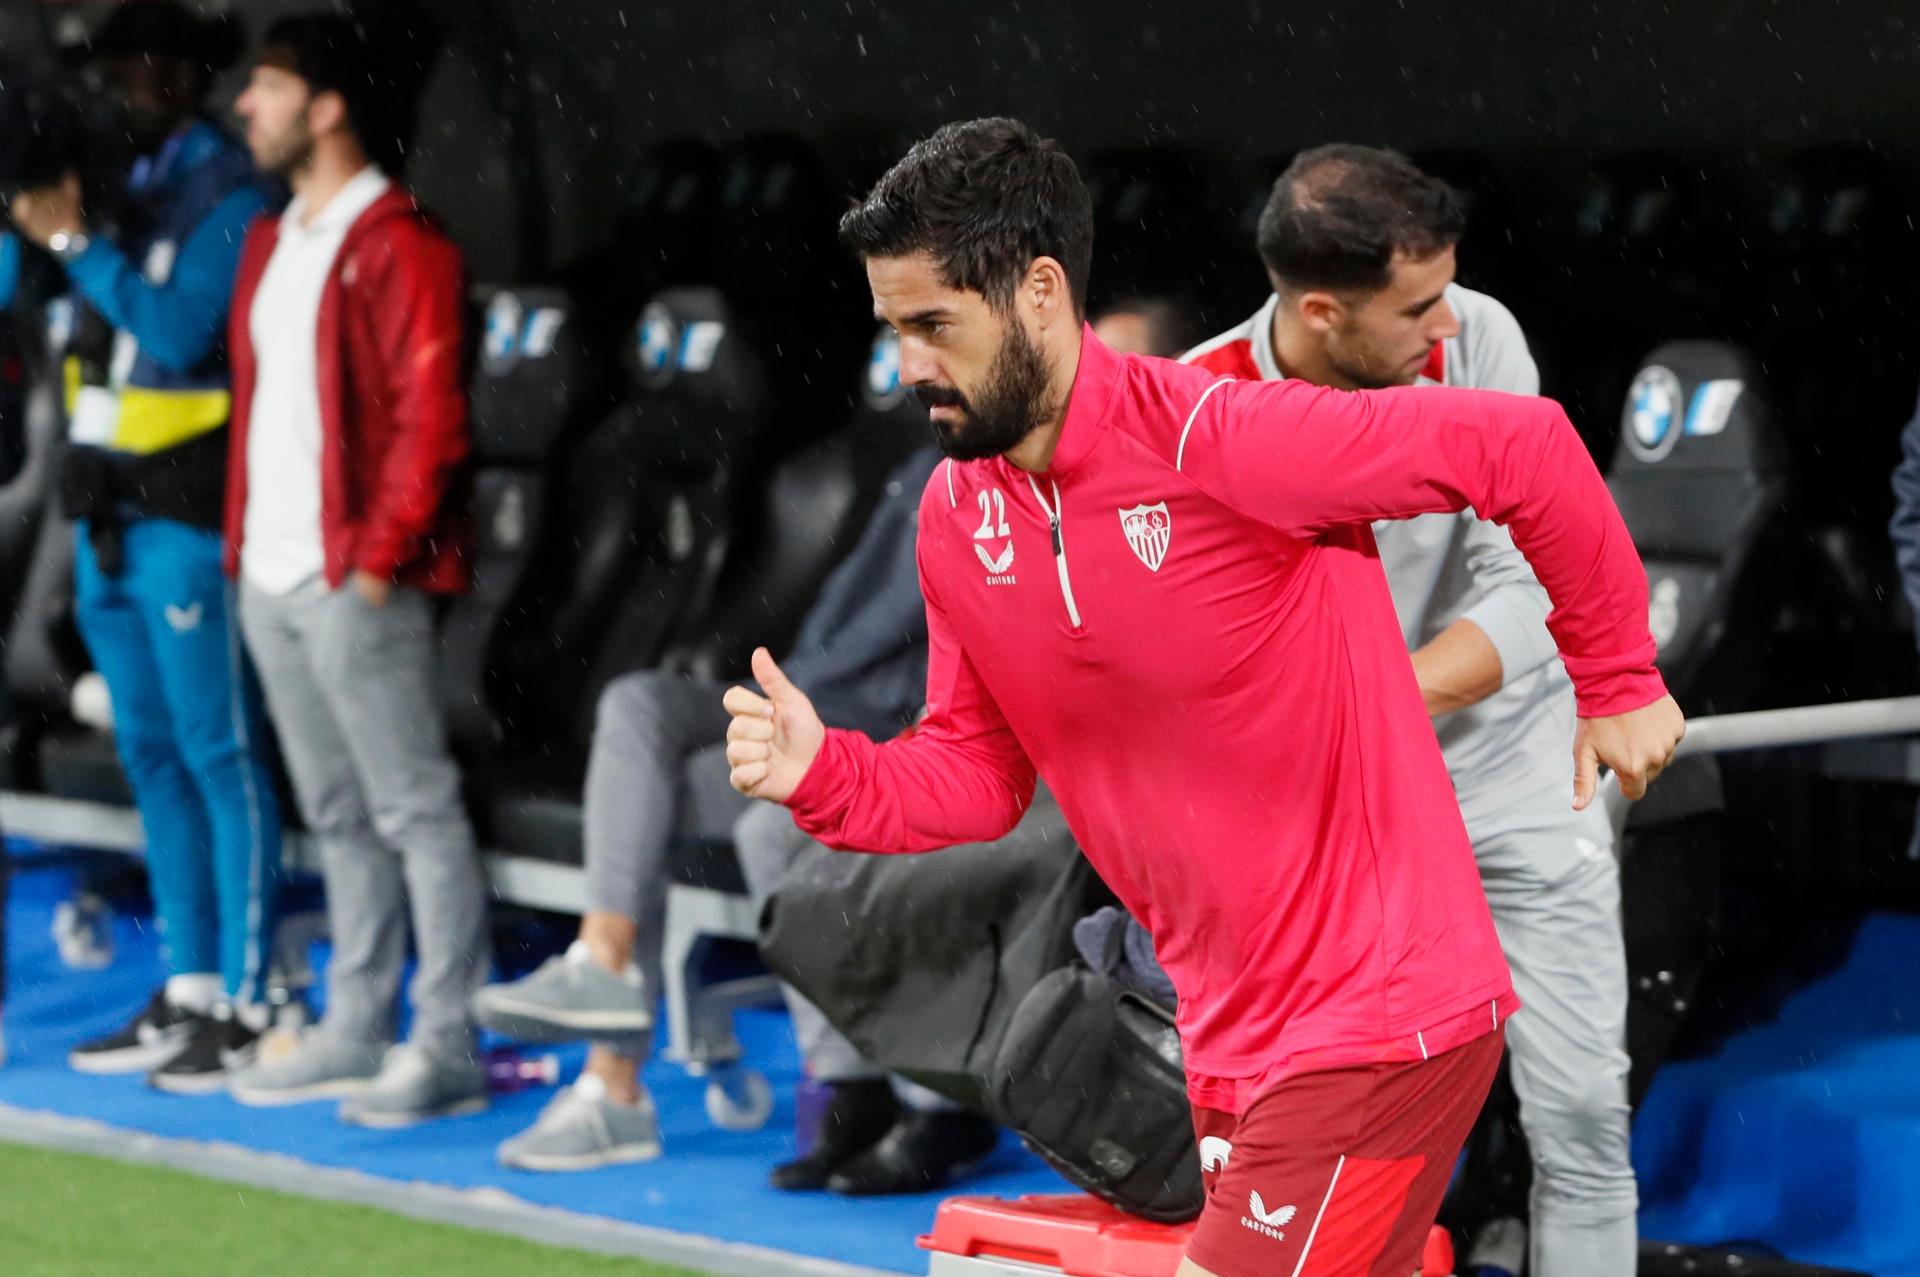 Isco rejected an offer from Saudi Arabia